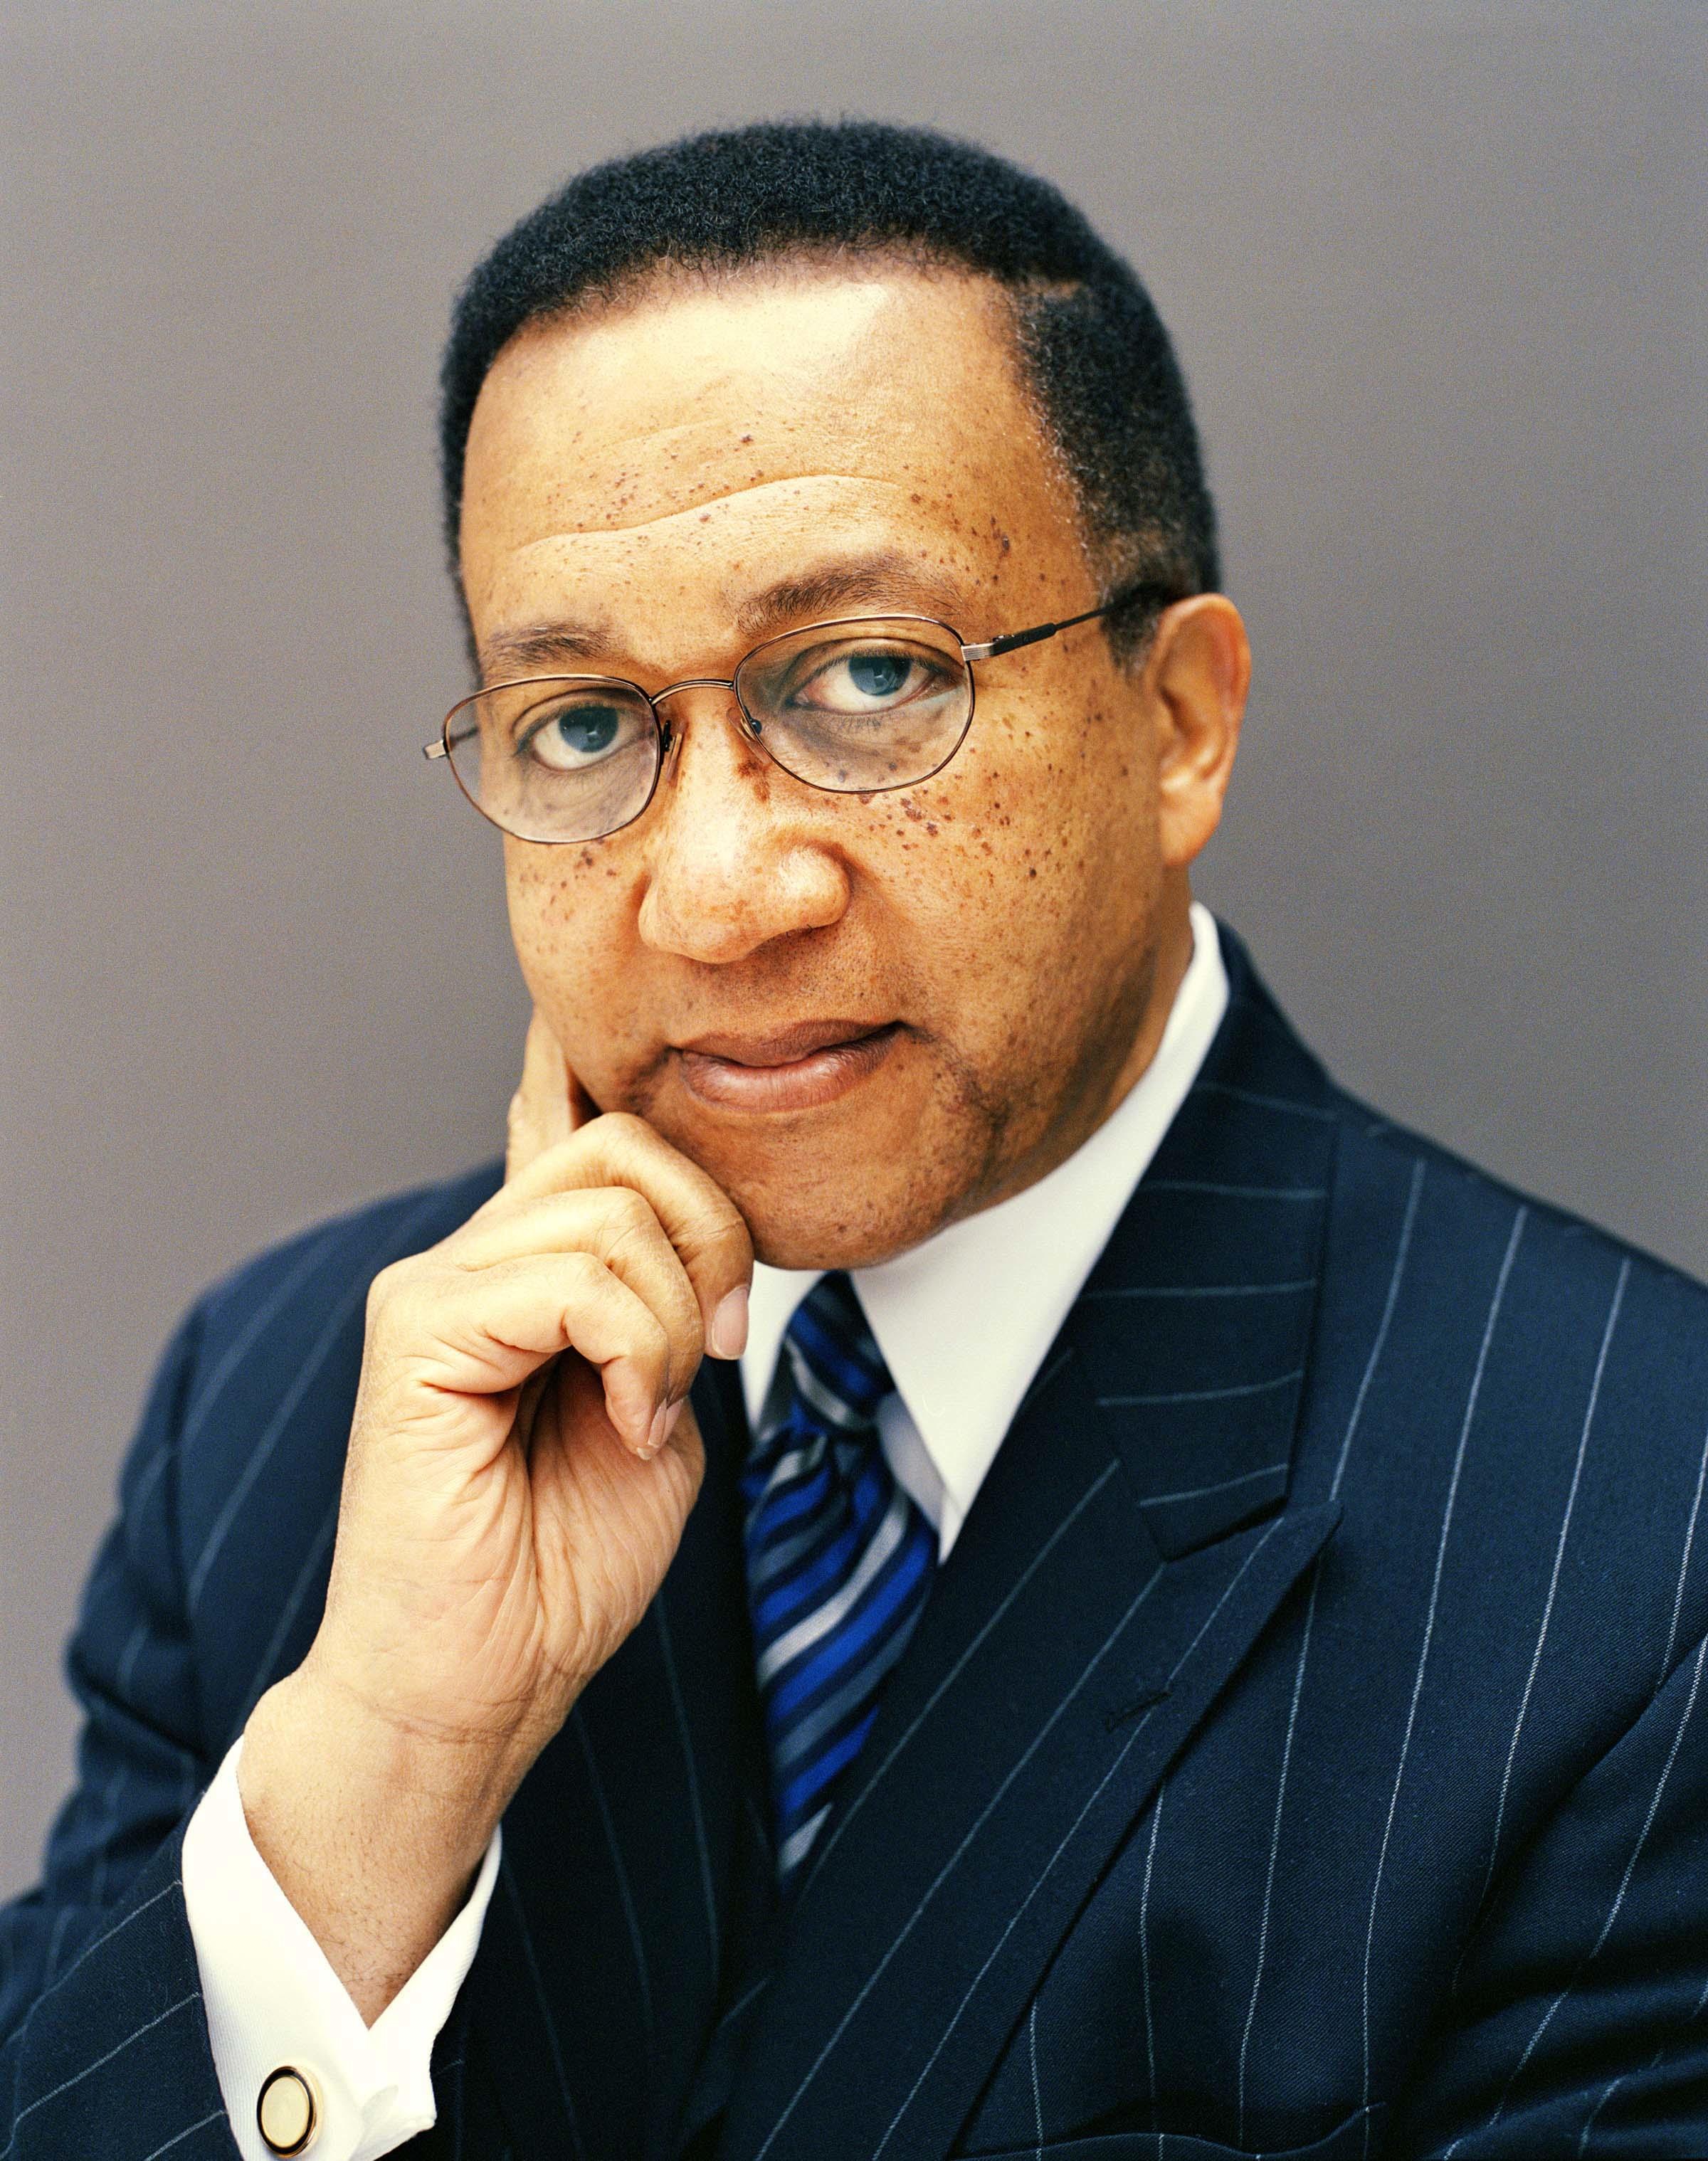 Listen to Dr. Ben Chavis today on the Carl Nelson show.